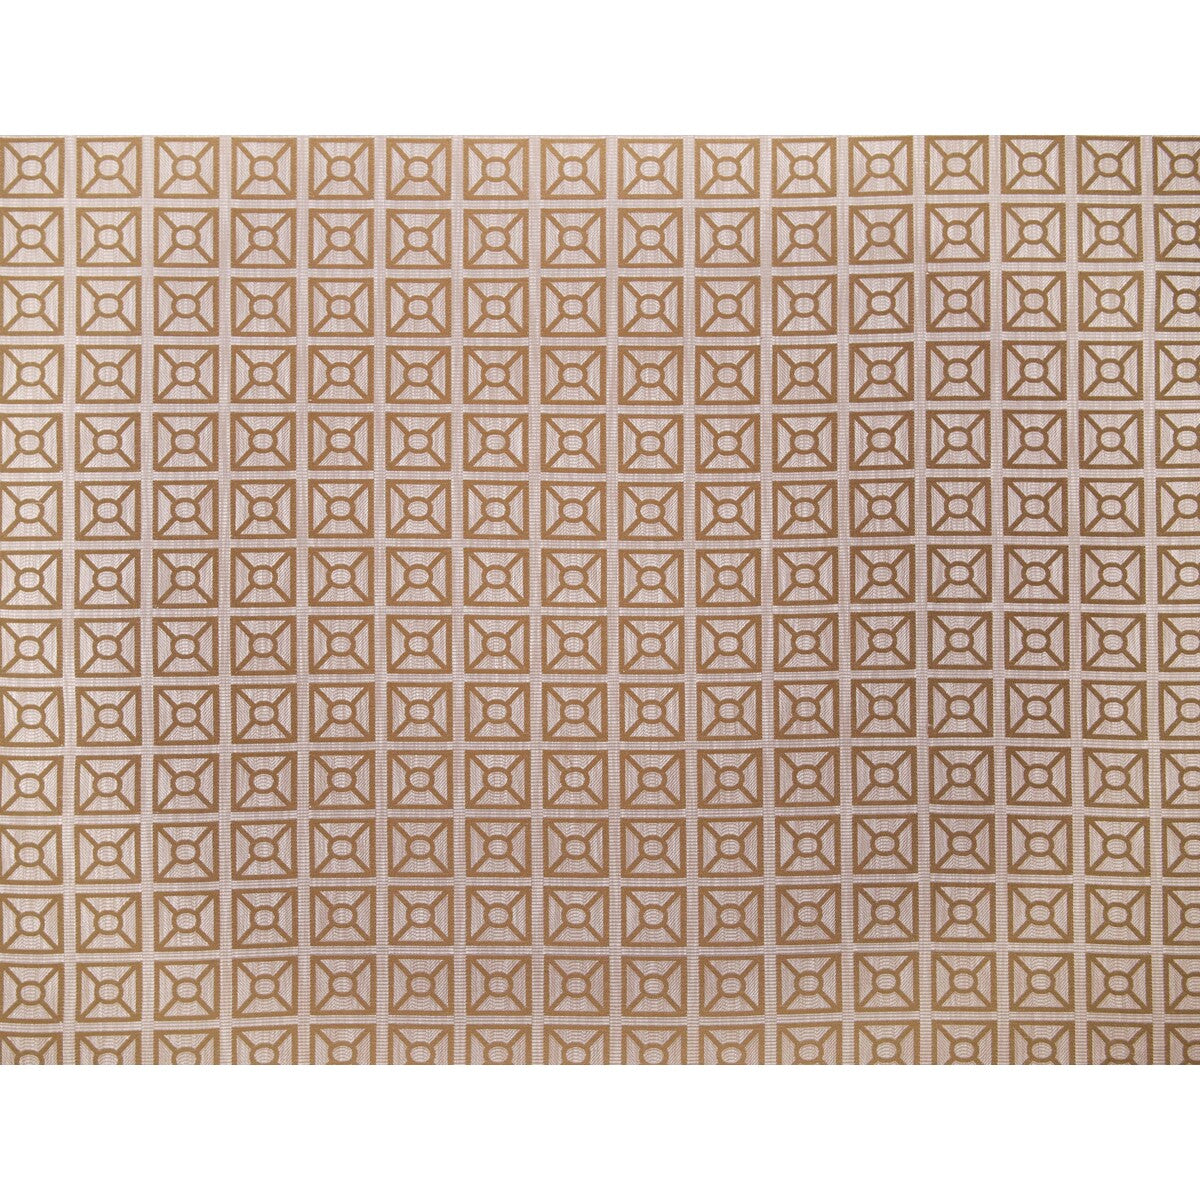 Arabica fabric in ocre color - pattern GDT5390.3.0 - by Gaston y Daniela in the Gaston Africalia collection